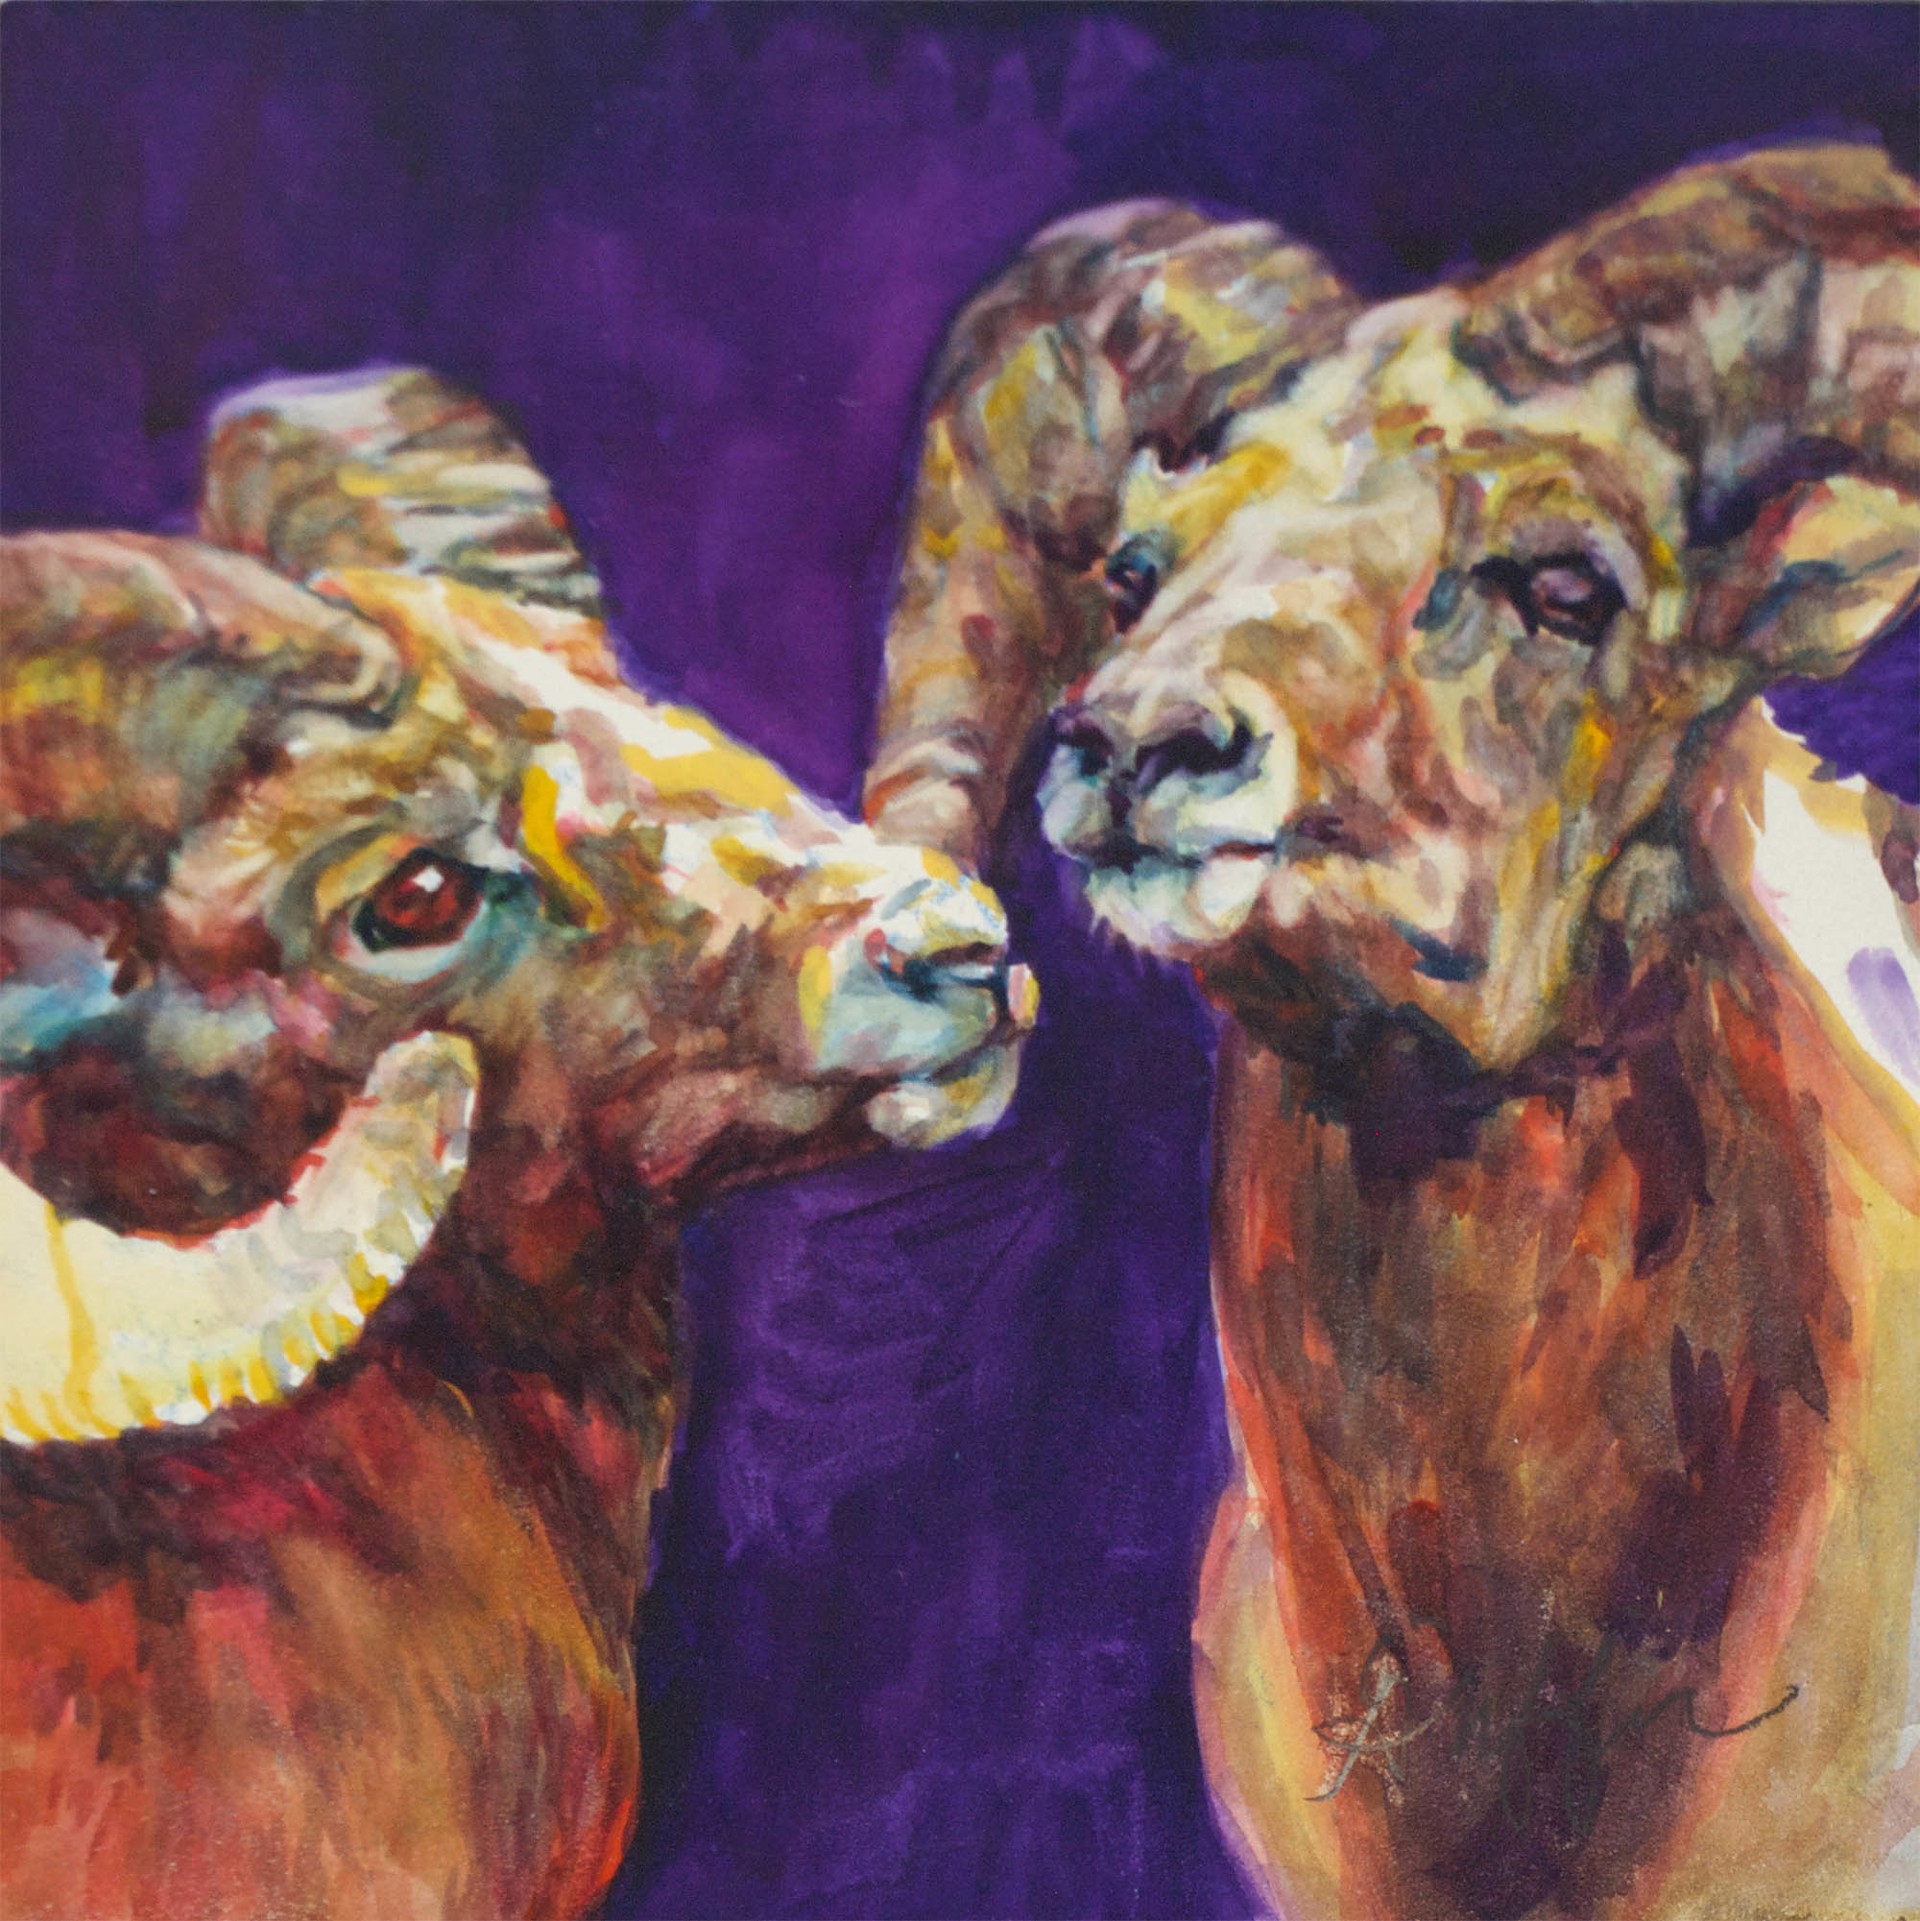 Original Watercolor Painting Featuring Two Heads Of Big Horn Sheep Over Purple Background